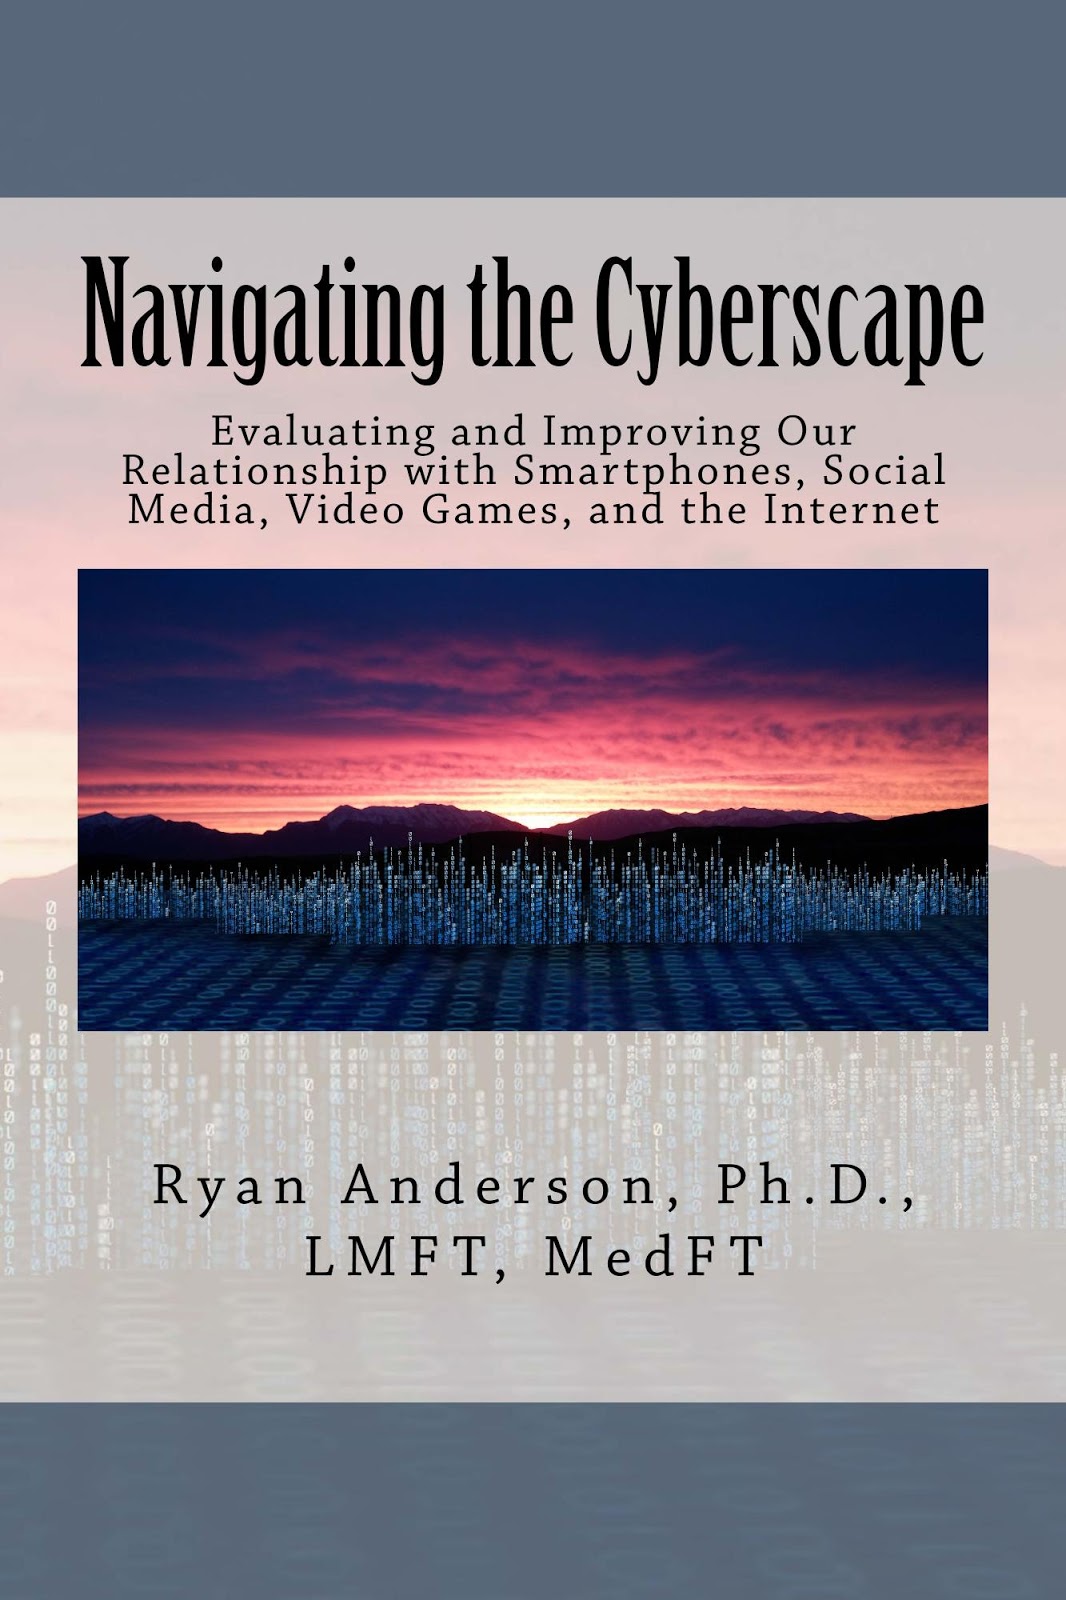 Navigating the Cyberscape: A Book Review